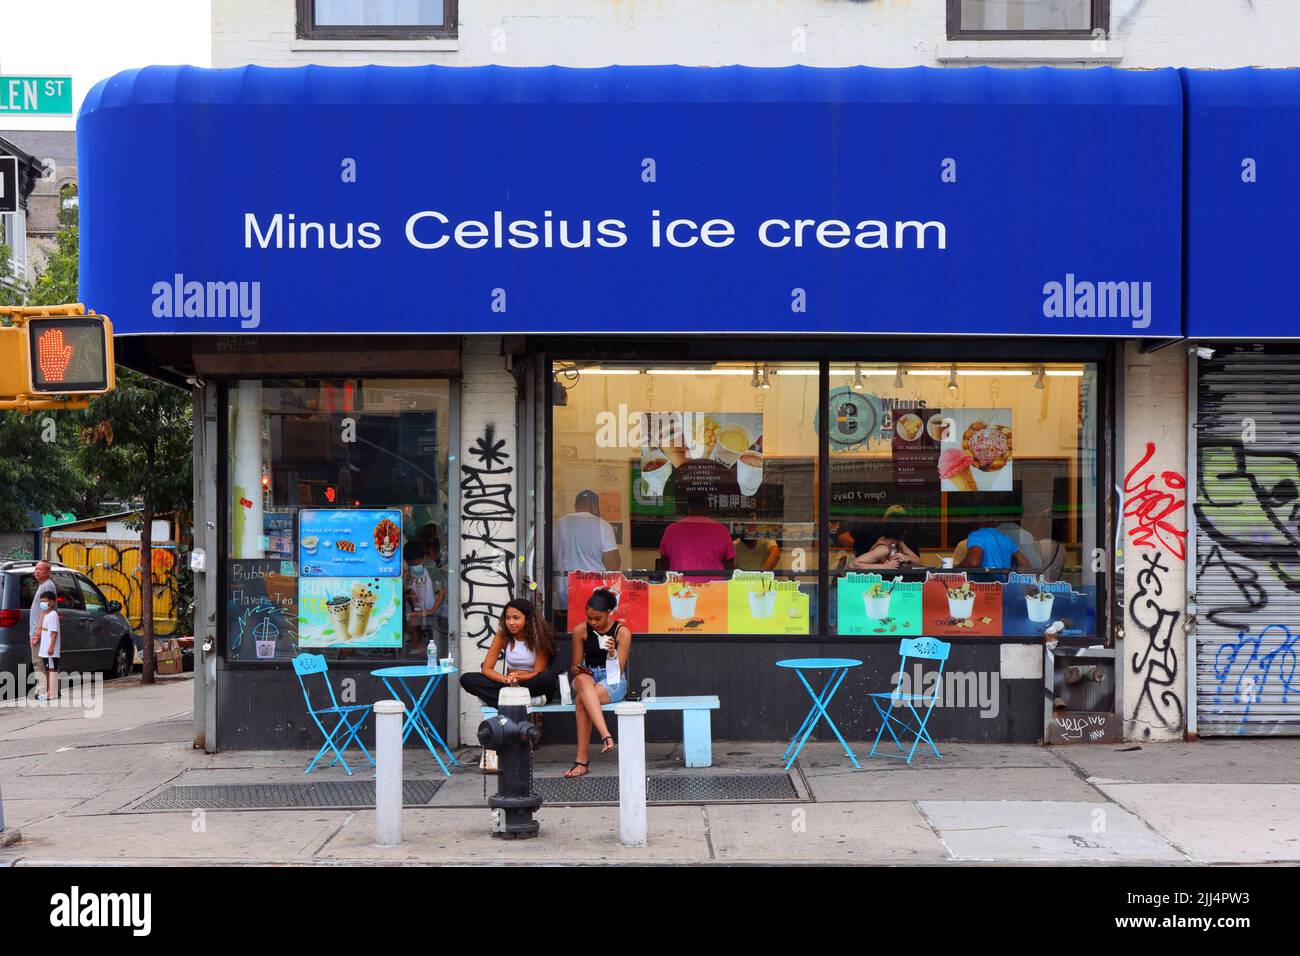 Minus Celsius Ice Cream, 302 Grand St, New York, NY. exterior storefront of a rolled ice cream shop in the Lower East Side, Chinatown. Stock Photo